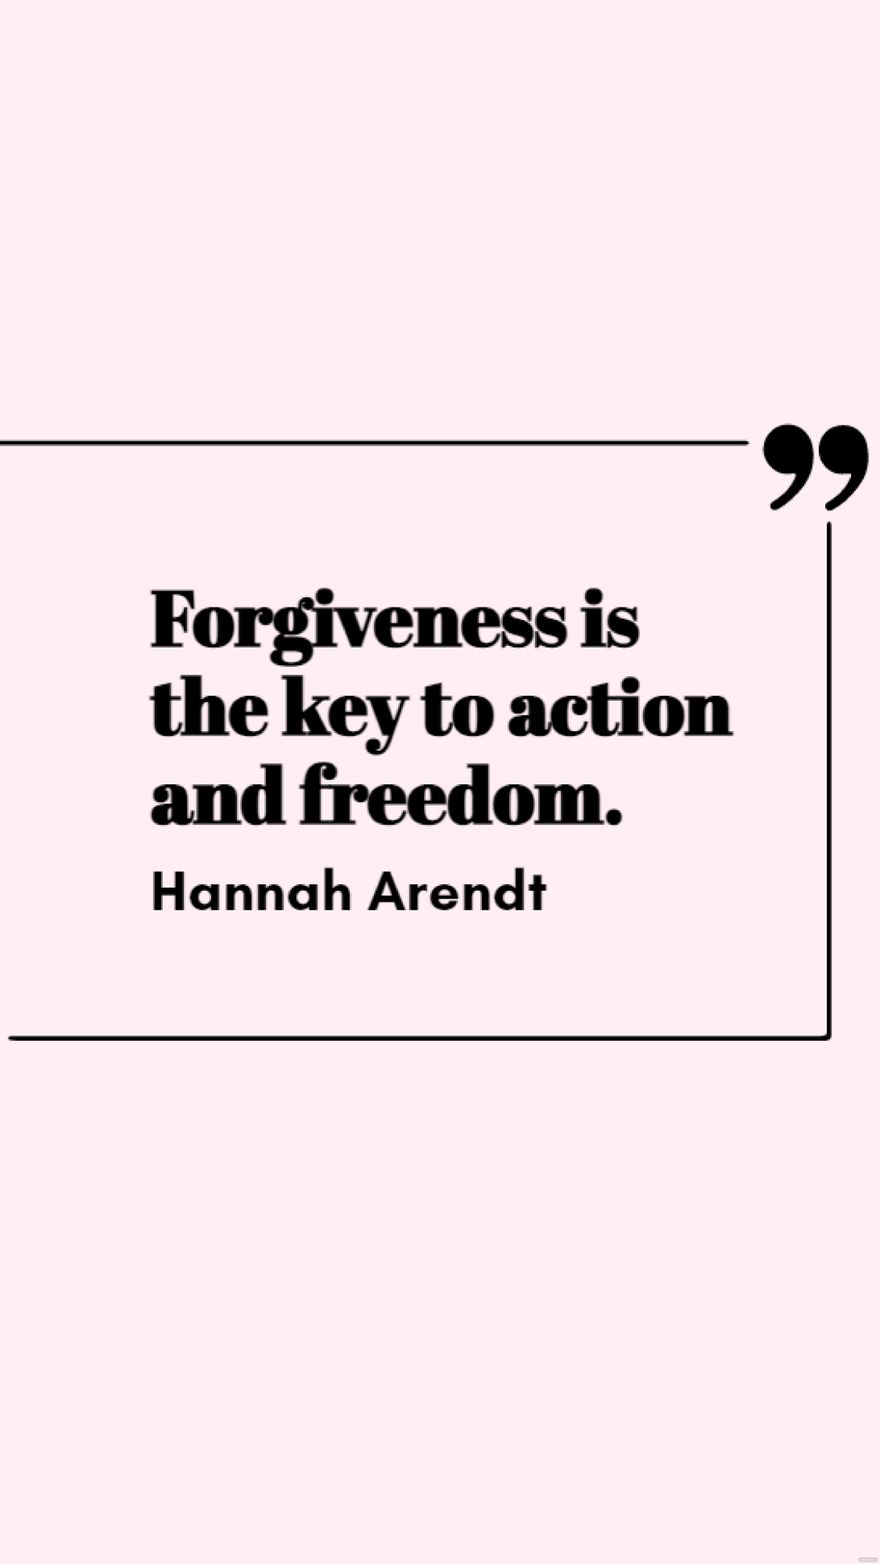 Free Hannah Arendt - Forgiveness is the key to action and freedom. in JPG